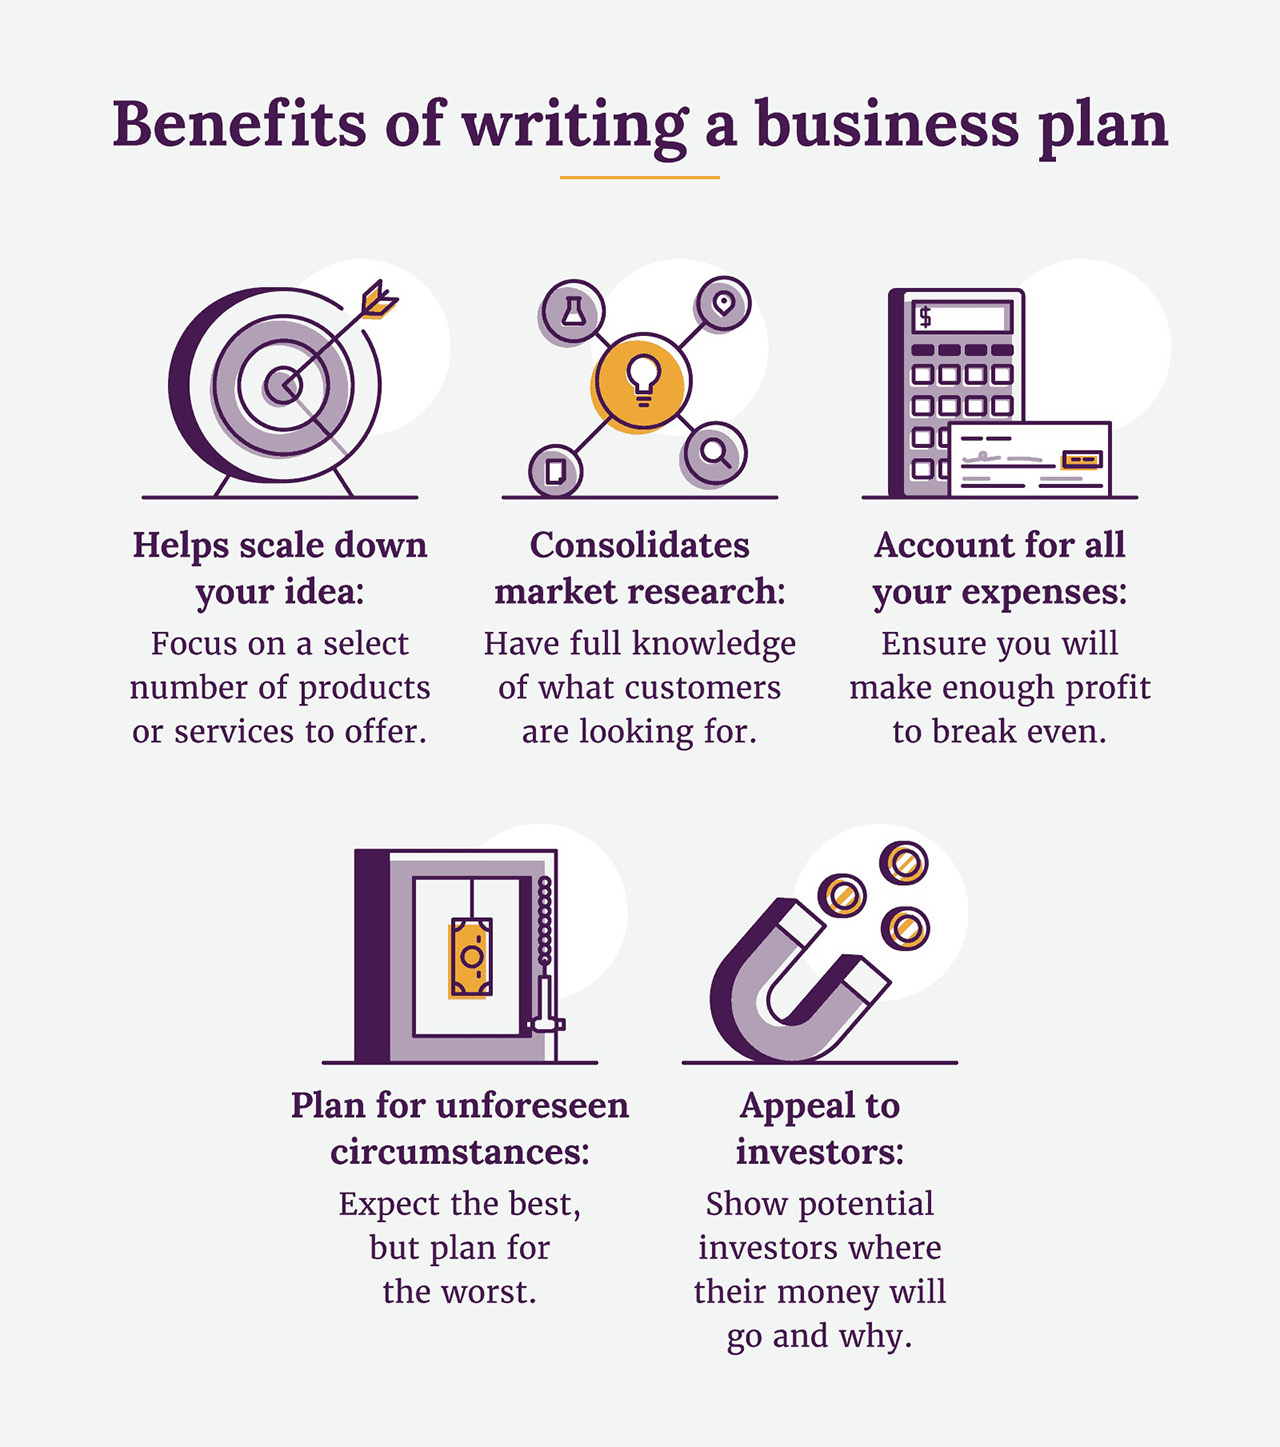 what is the importance and purpose of writing a business plan